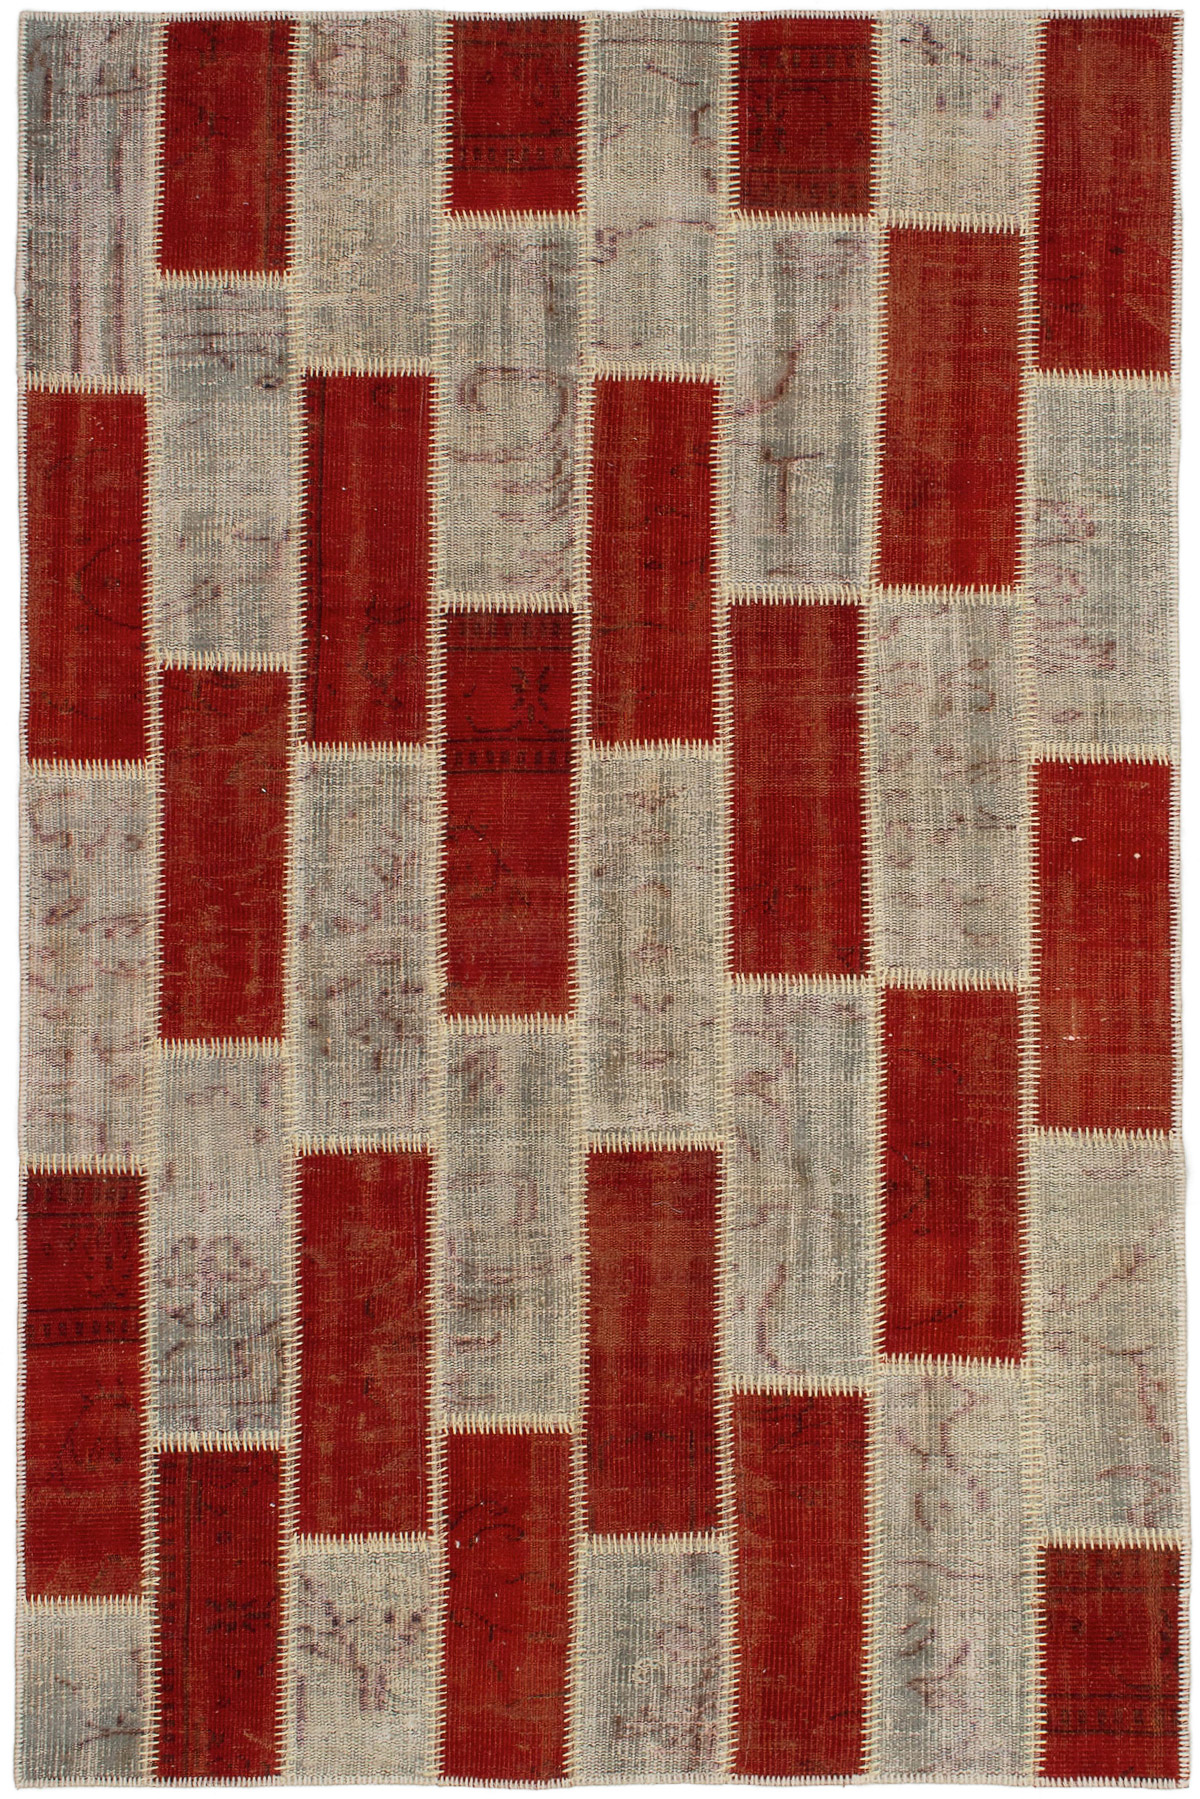 Hand-knotted Color Transition Patch Dark Copper, Light Khaki Wool Rug 4'11" x 7'7" Size: 4'11" x 7'7"